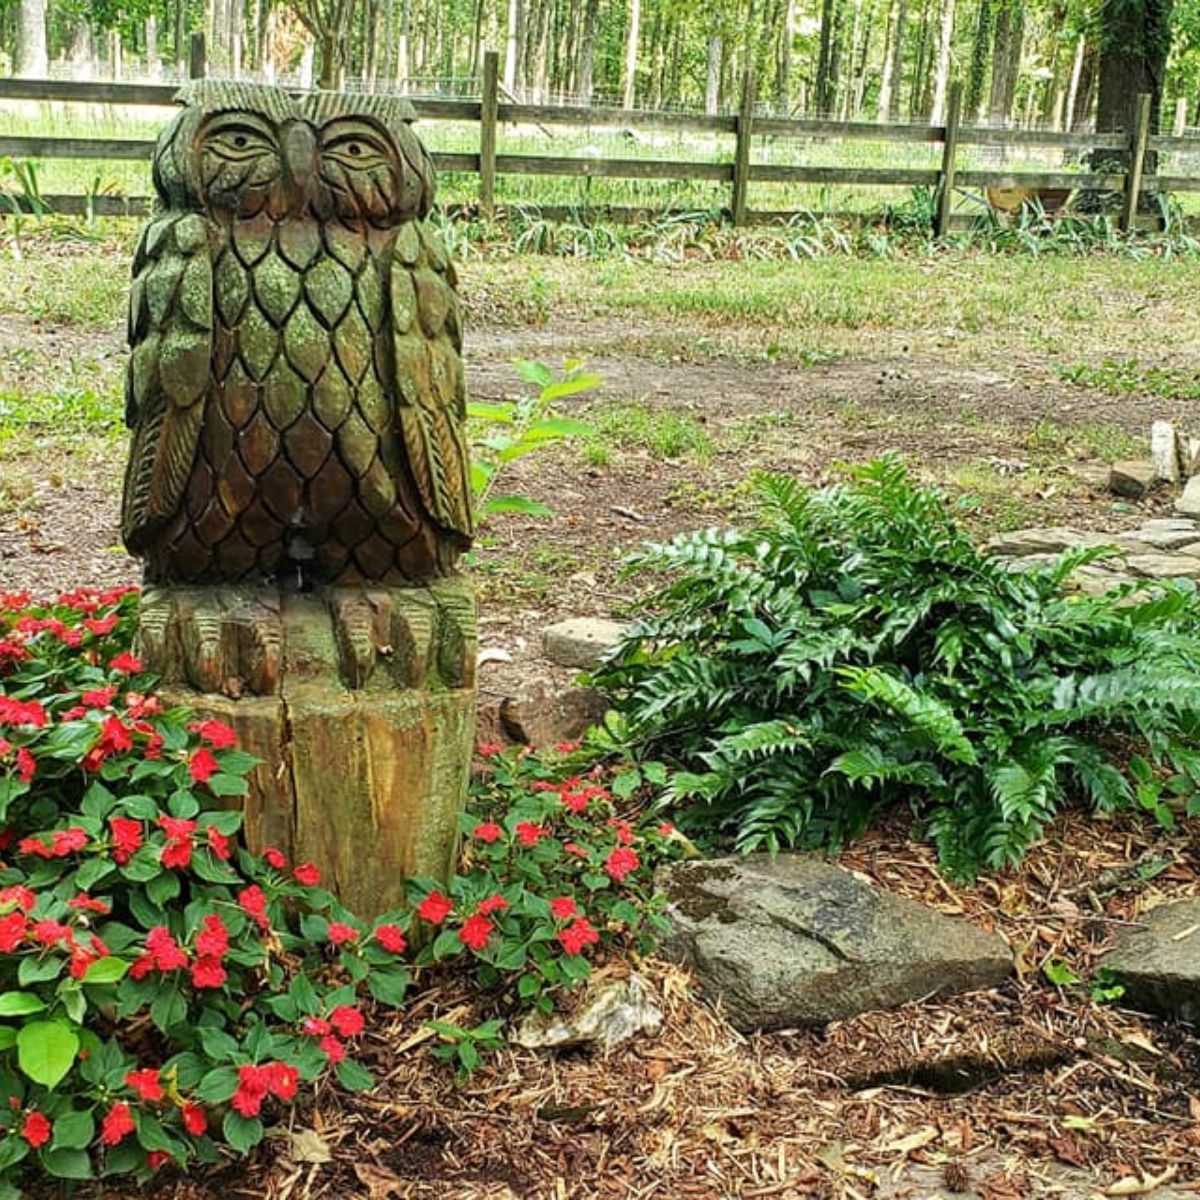 chainsaw aert- owl, surrounded by red impatiens